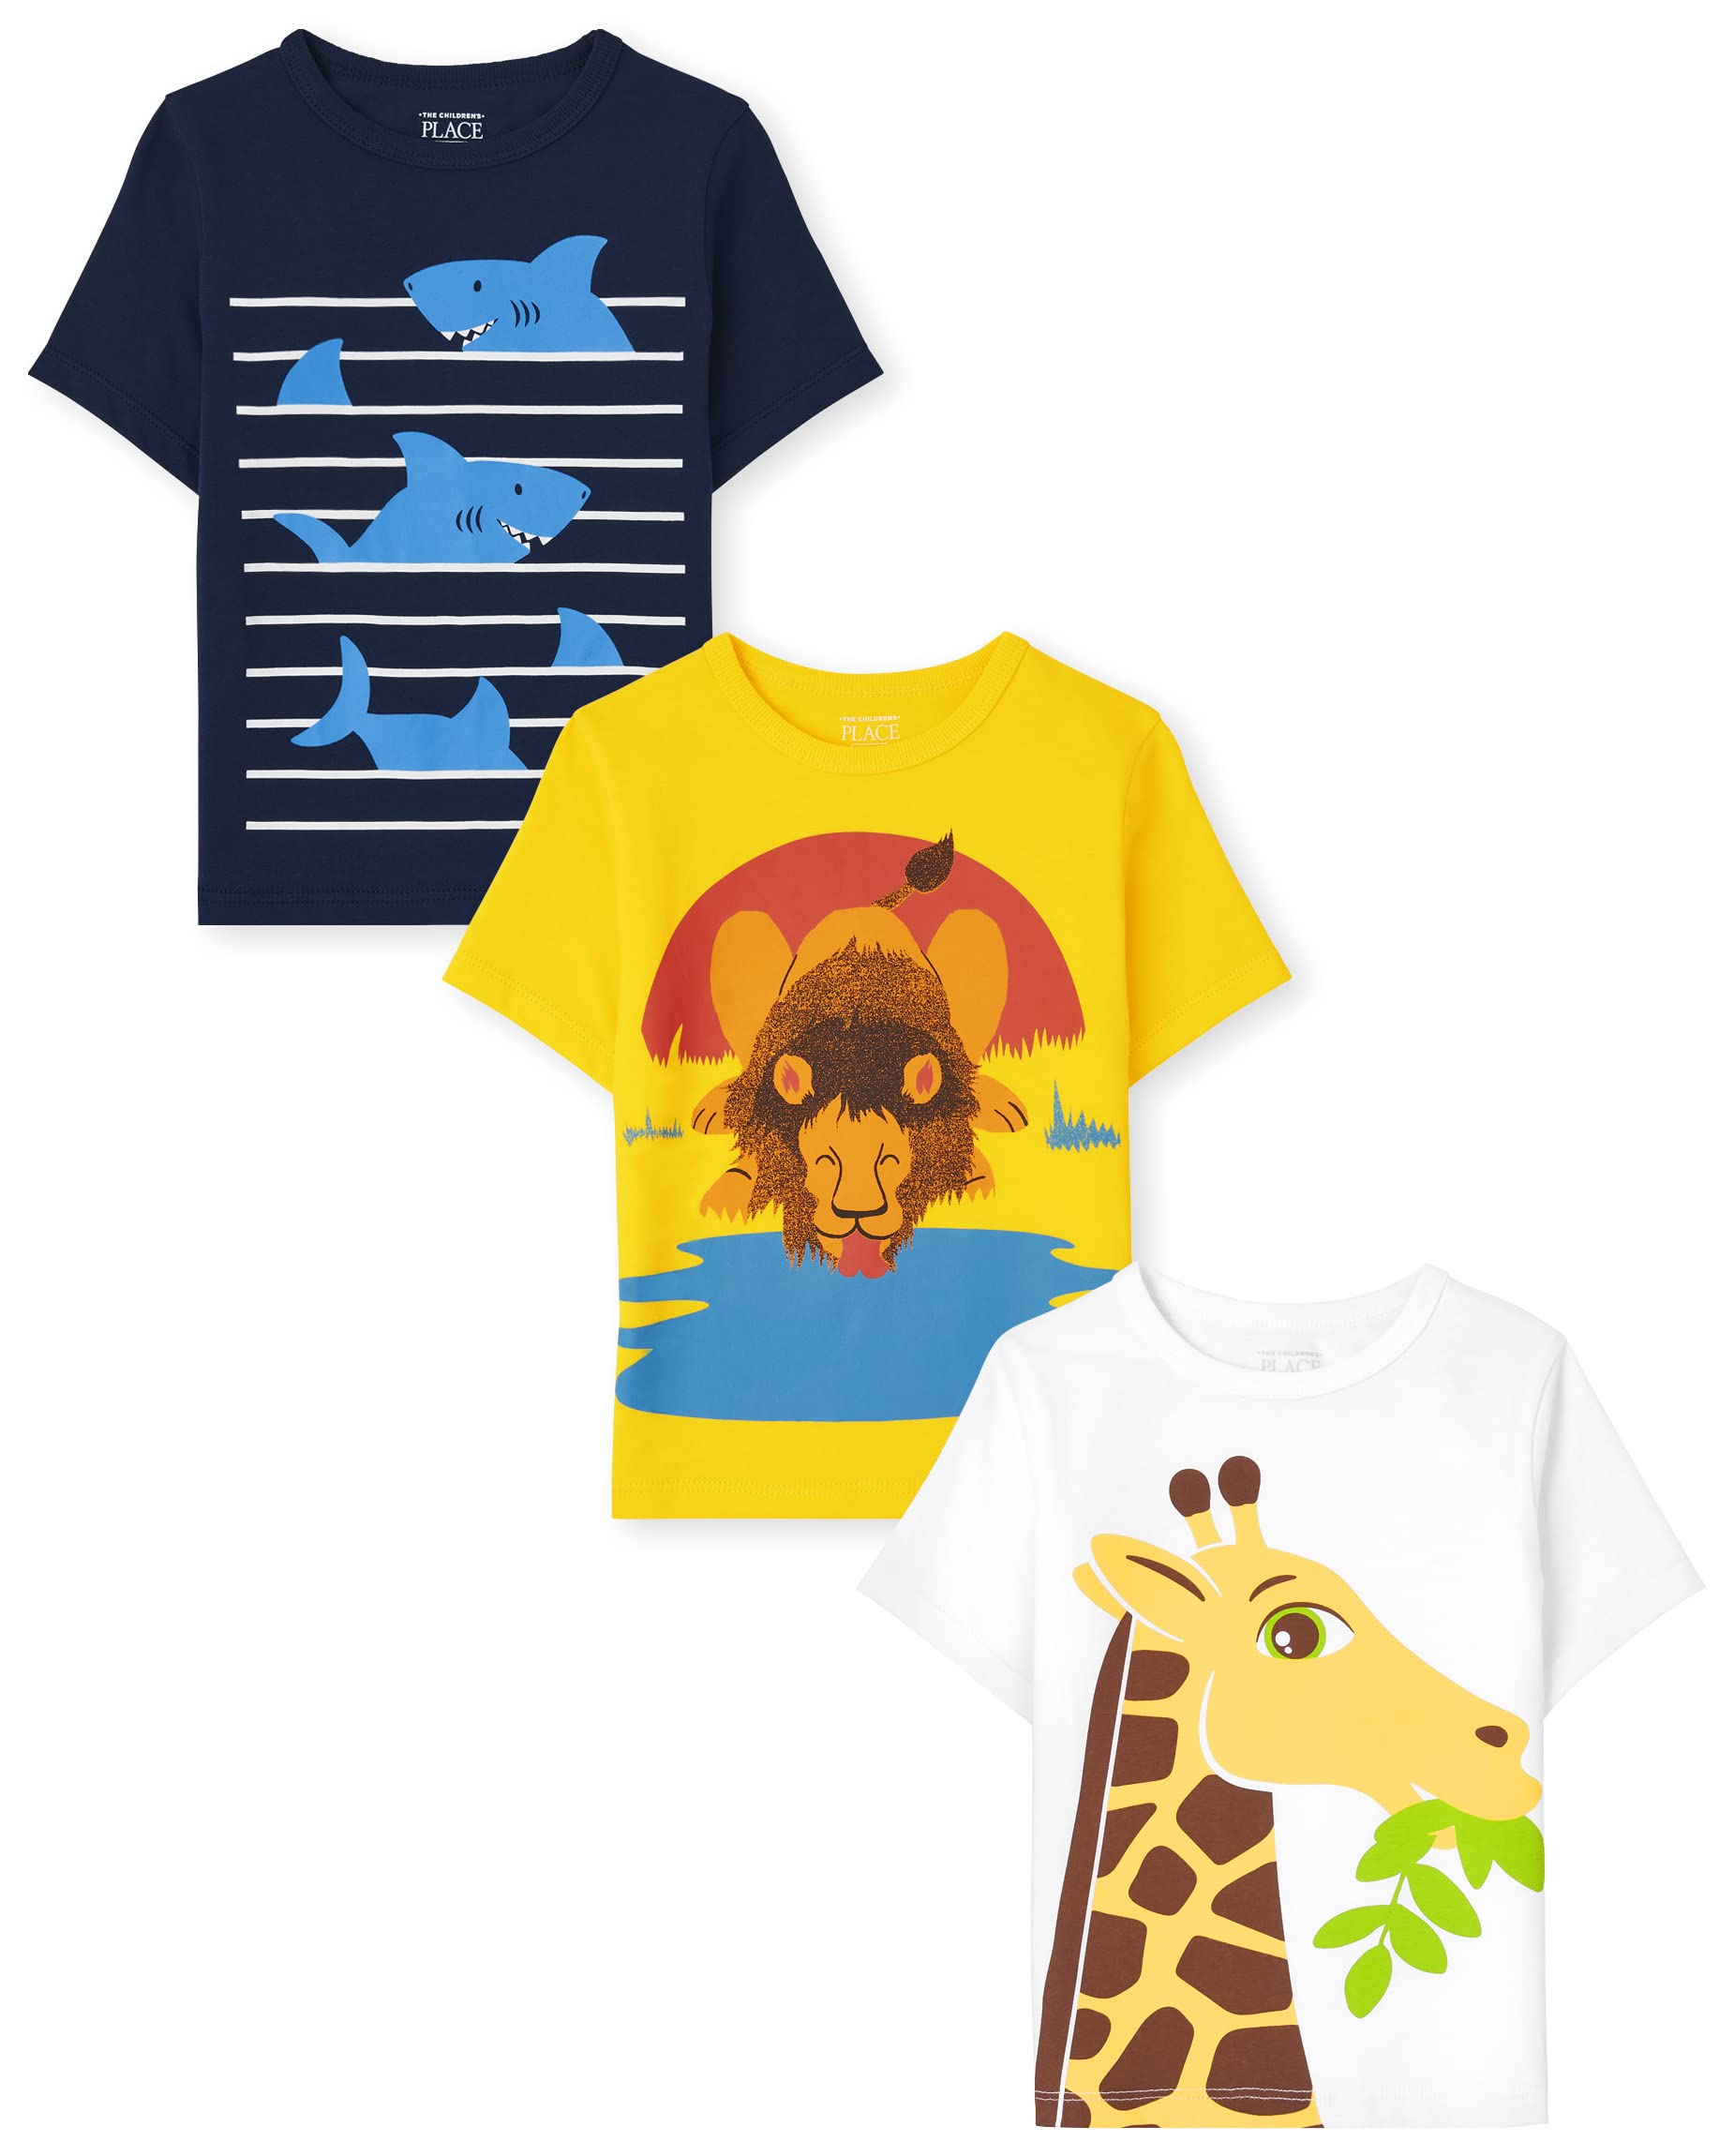 3-Count The Children's Place Toddler & Little Boys' Tees (Shark/Lion/Giraffe, 18-24M,2T,4T,5T) $7 ($2.34 EA) + Free Shipping w/ Prime or on $35+